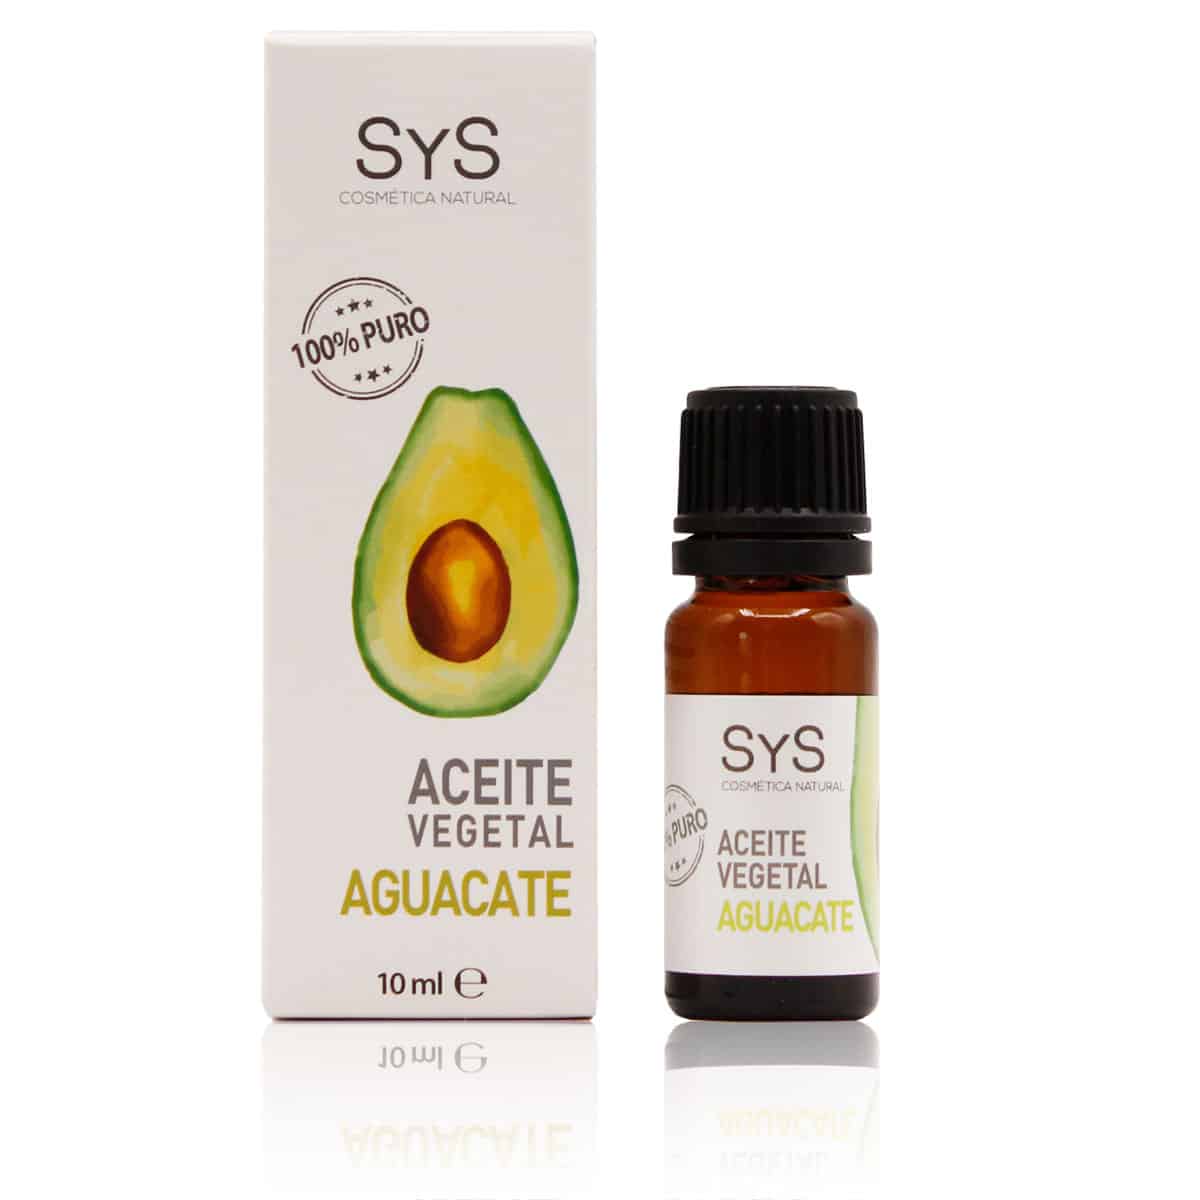 Buy Avocado Vegetable Oil 100% Pure 10ml SYS